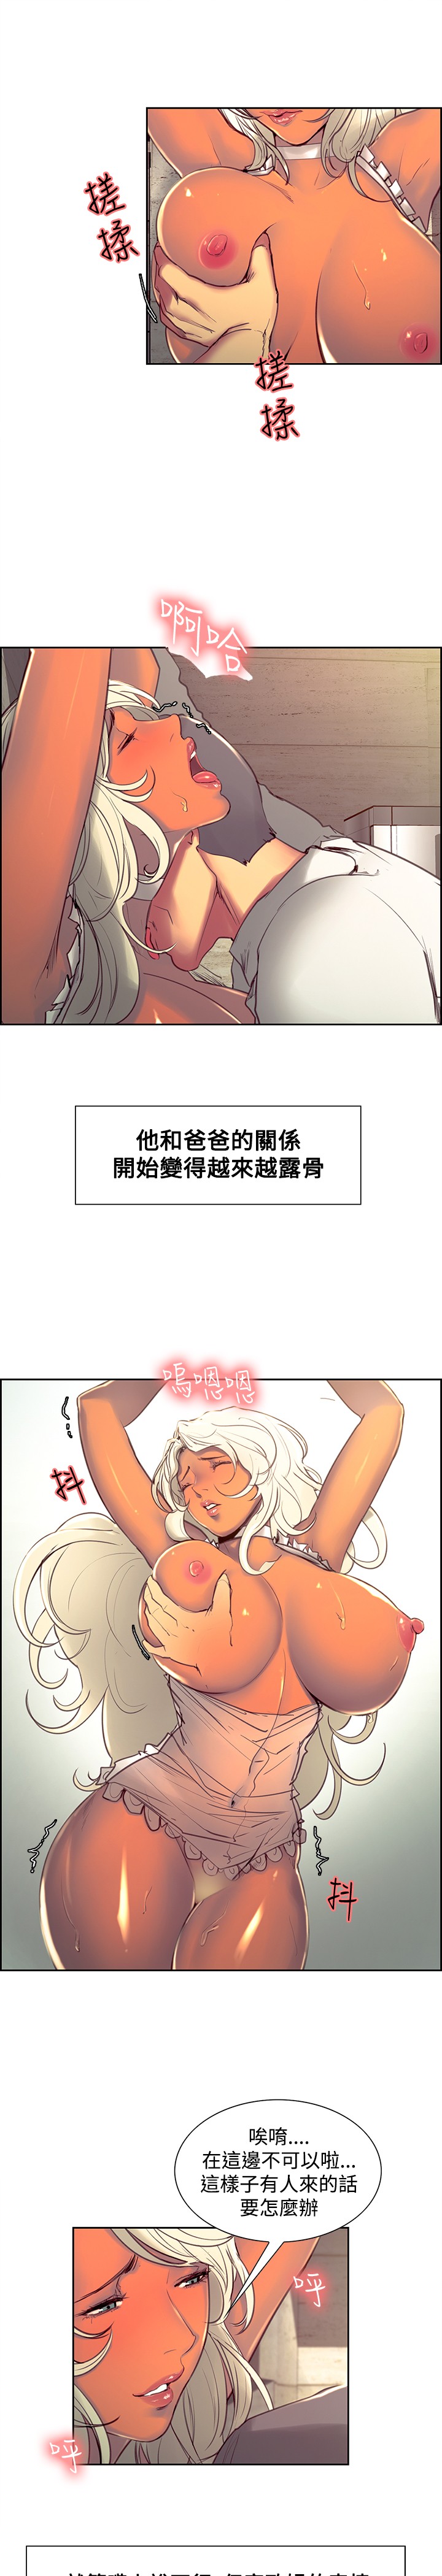 [Serious] Domesticate the Housekeeper 调教家政妇 Ch.29~41 [Chinese]中文 page 39 full